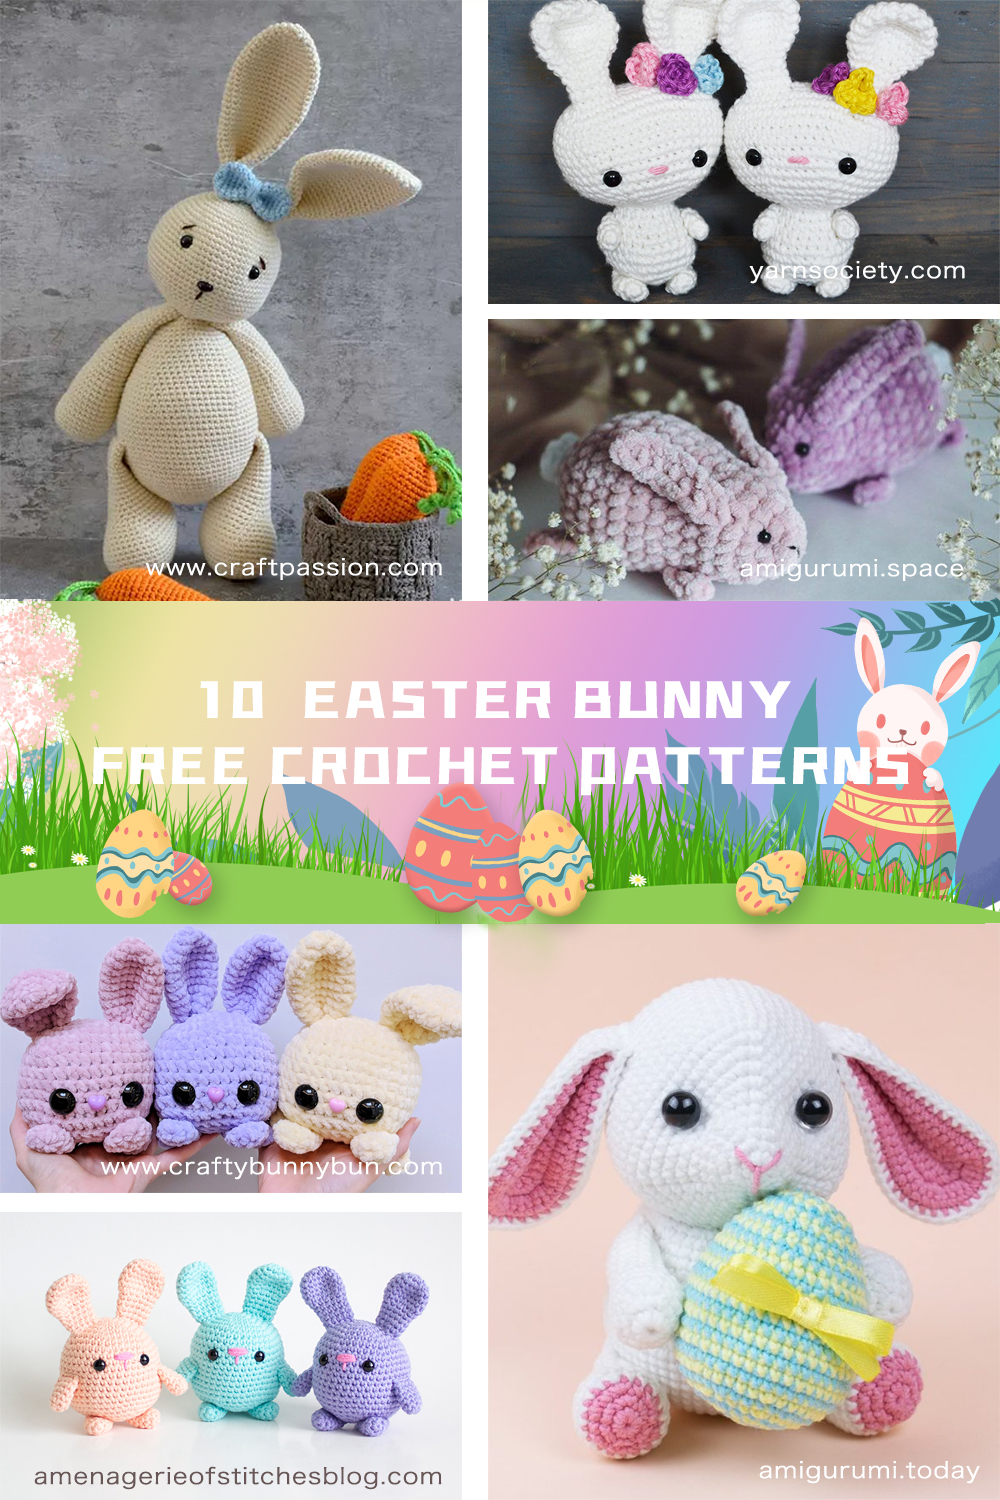  10 Easter Bunny FREE Crochet Patterns 